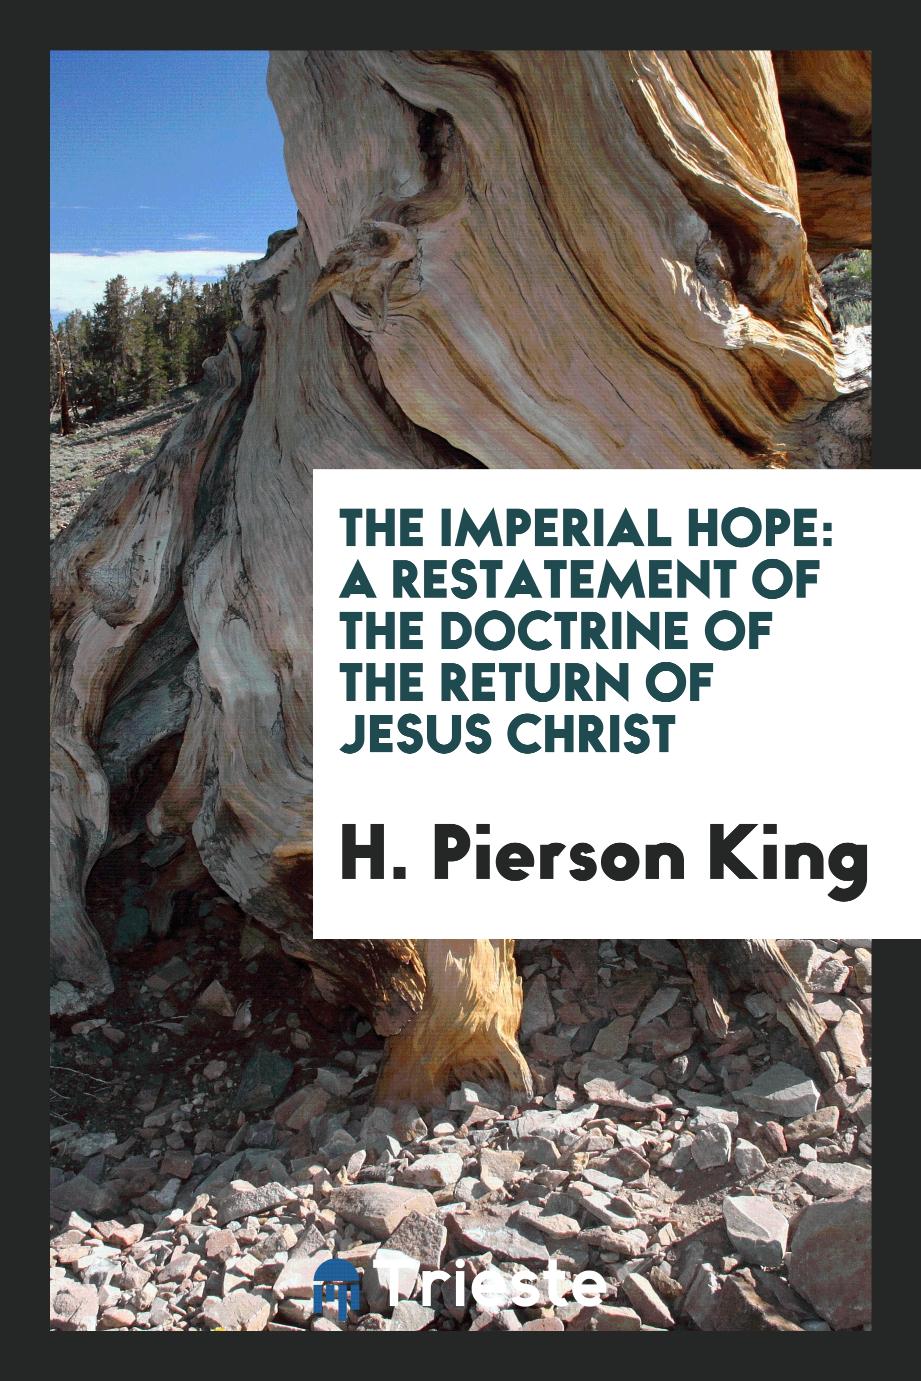 The Imperial Hope: A Restatement of the Doctrine of the Return of Jesus Christ